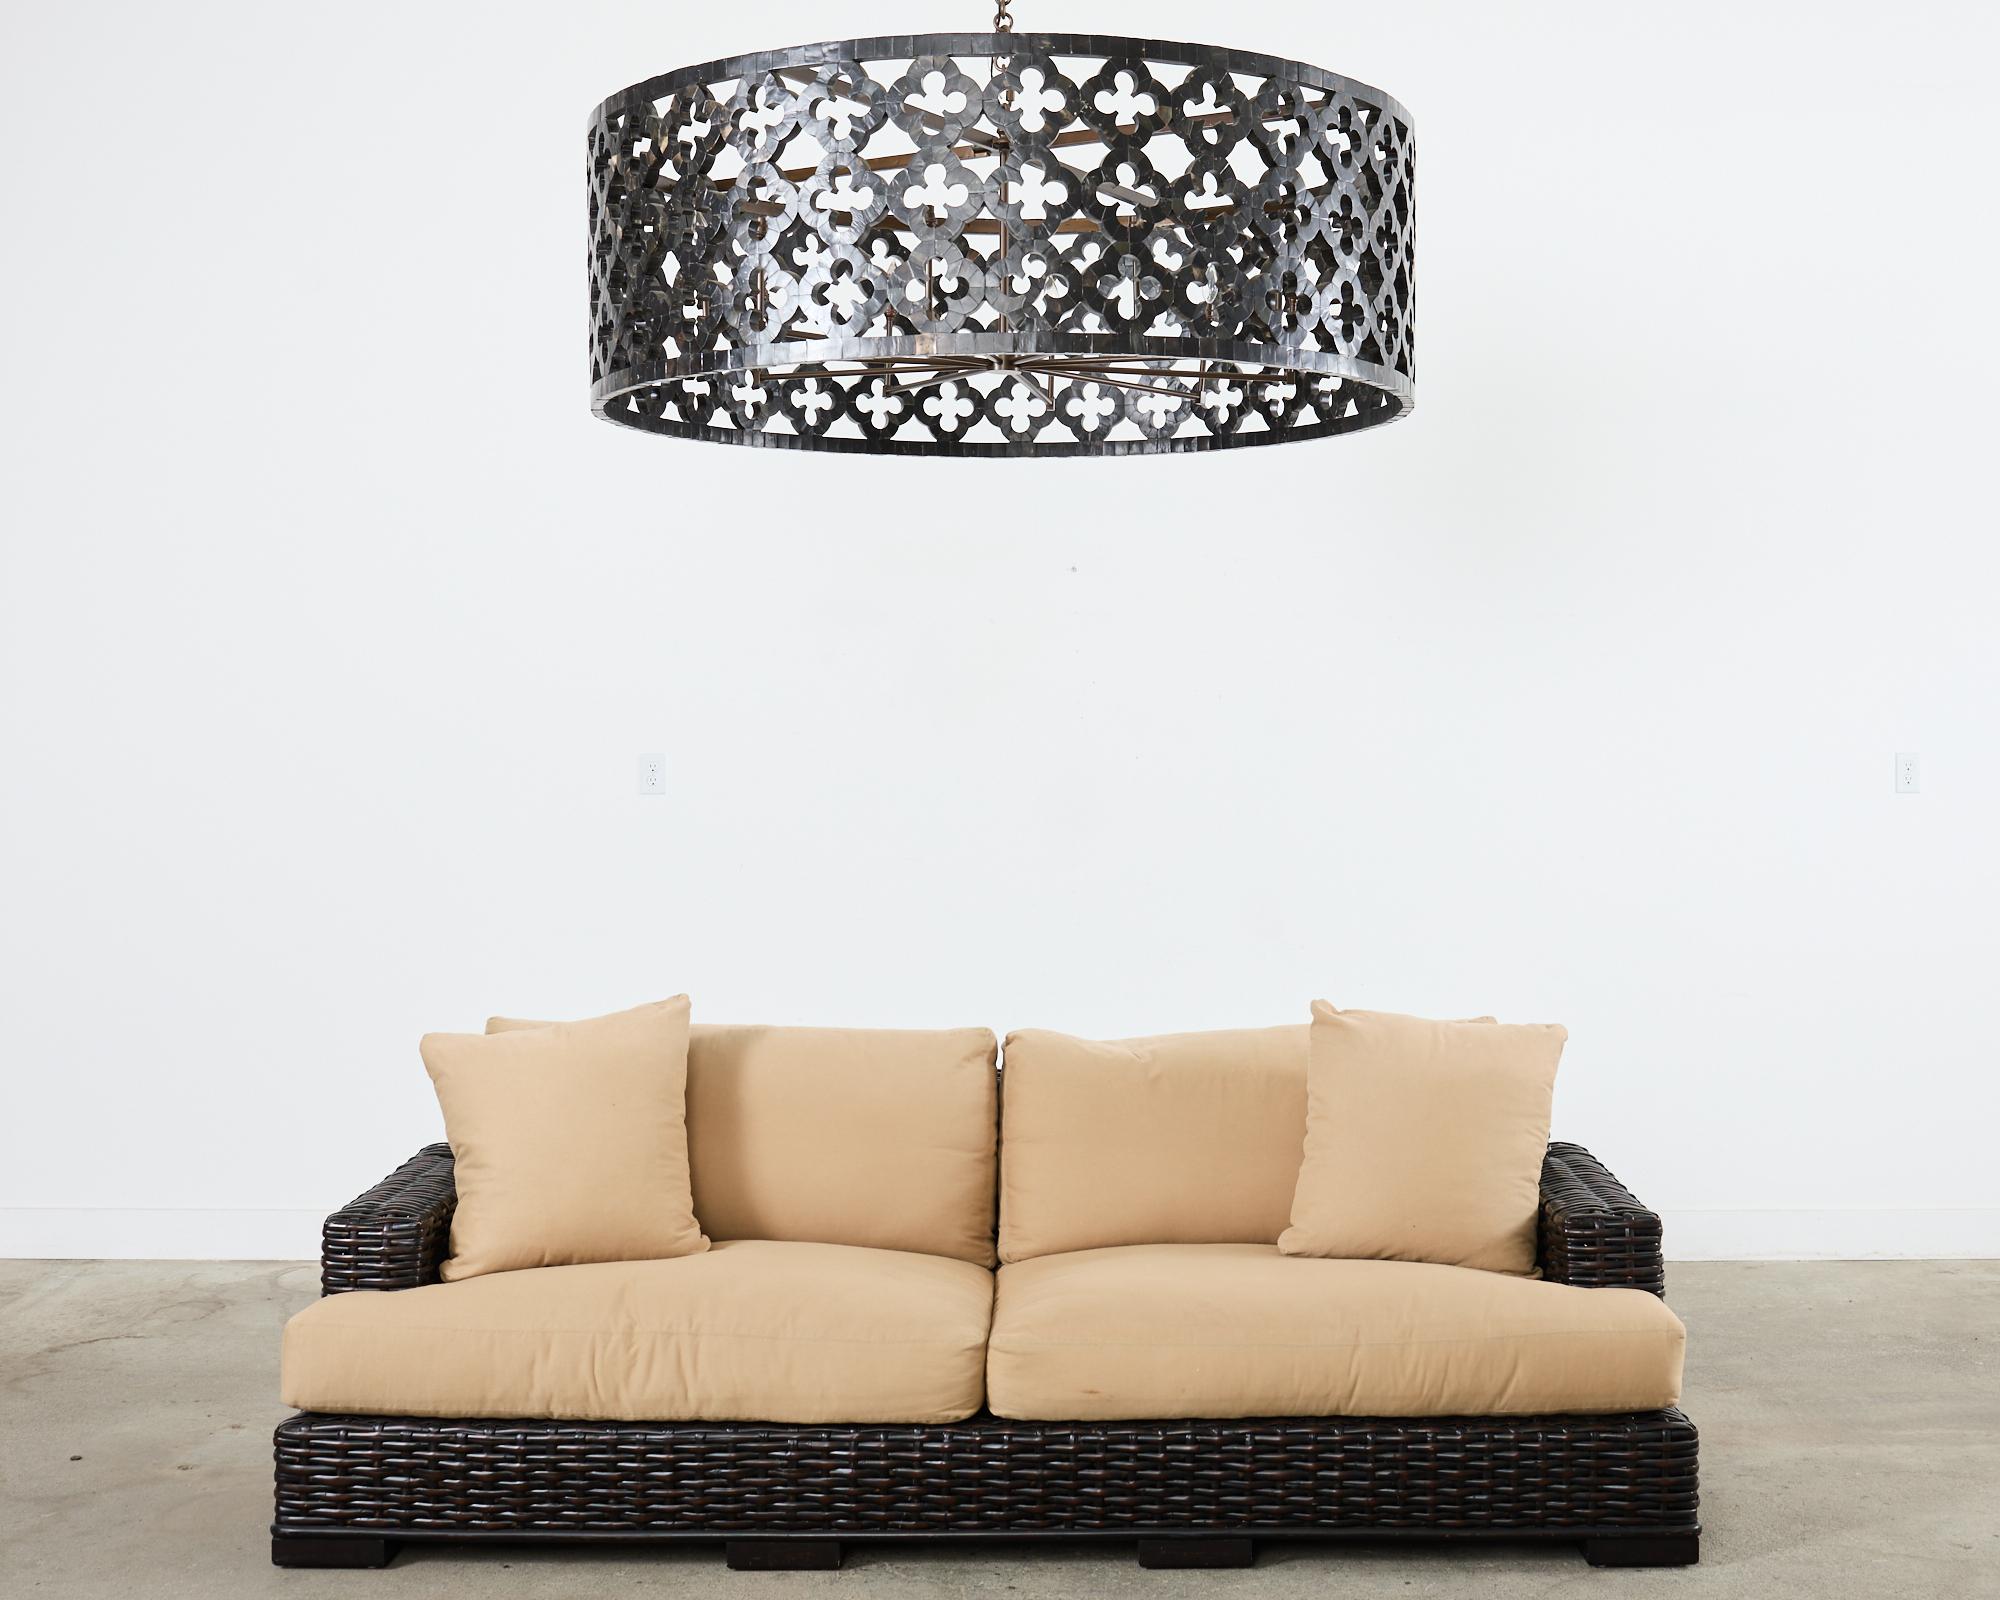 imposing sofa crafted from woven rattan in the organic modern coastal style by Ralph Lauren. The canyon sofa features an oversized hardwood frame completely covered with woven split reed rattan in a dramatic black mahogany finish. The frame is